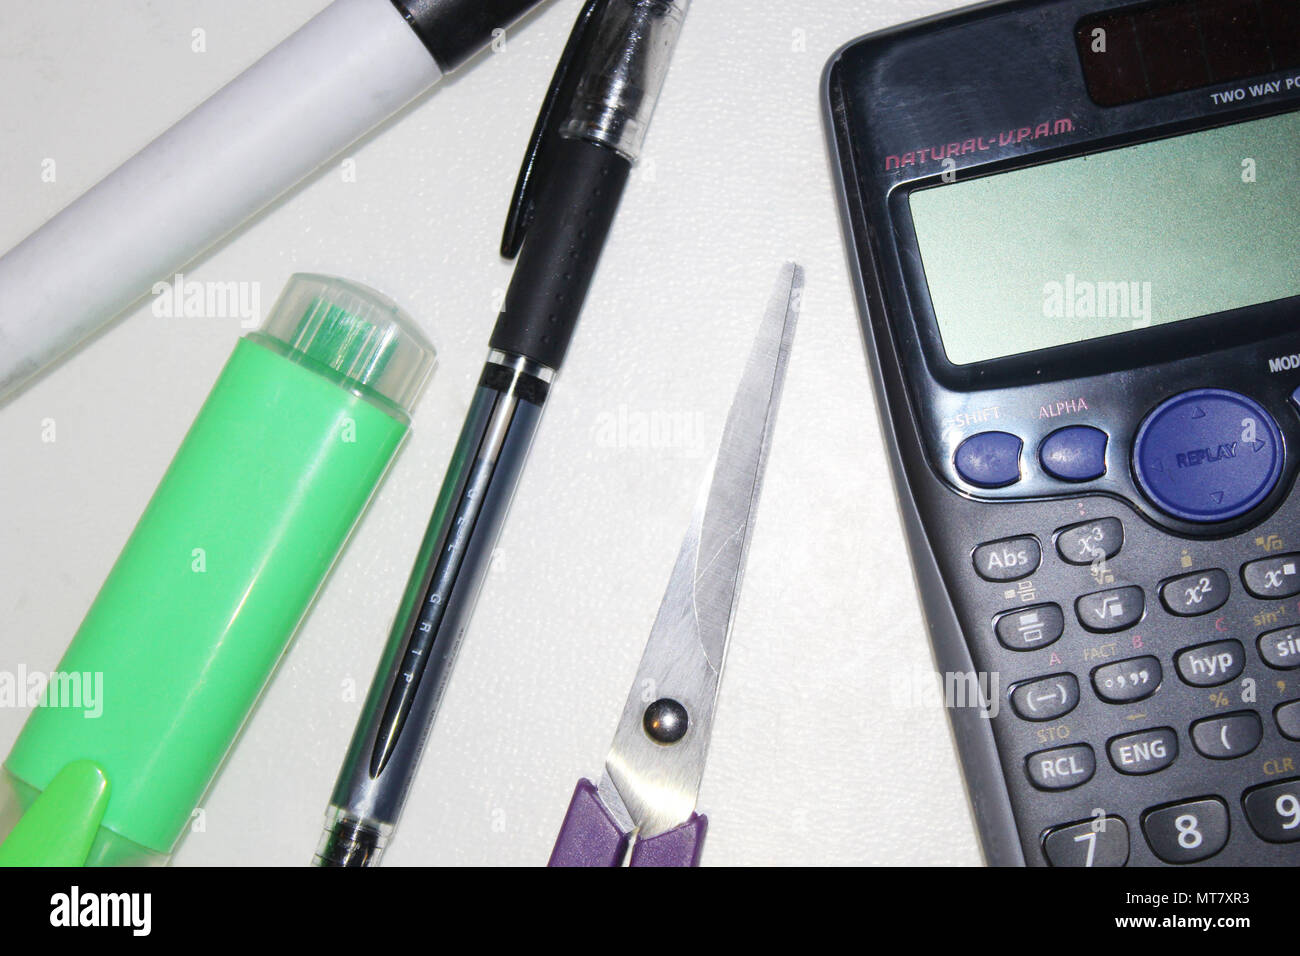 Well Used Stationery Kit Consisting of a Calculator, Highlighter, Black Pen, Scissors, and Marker Pen Stock Photo